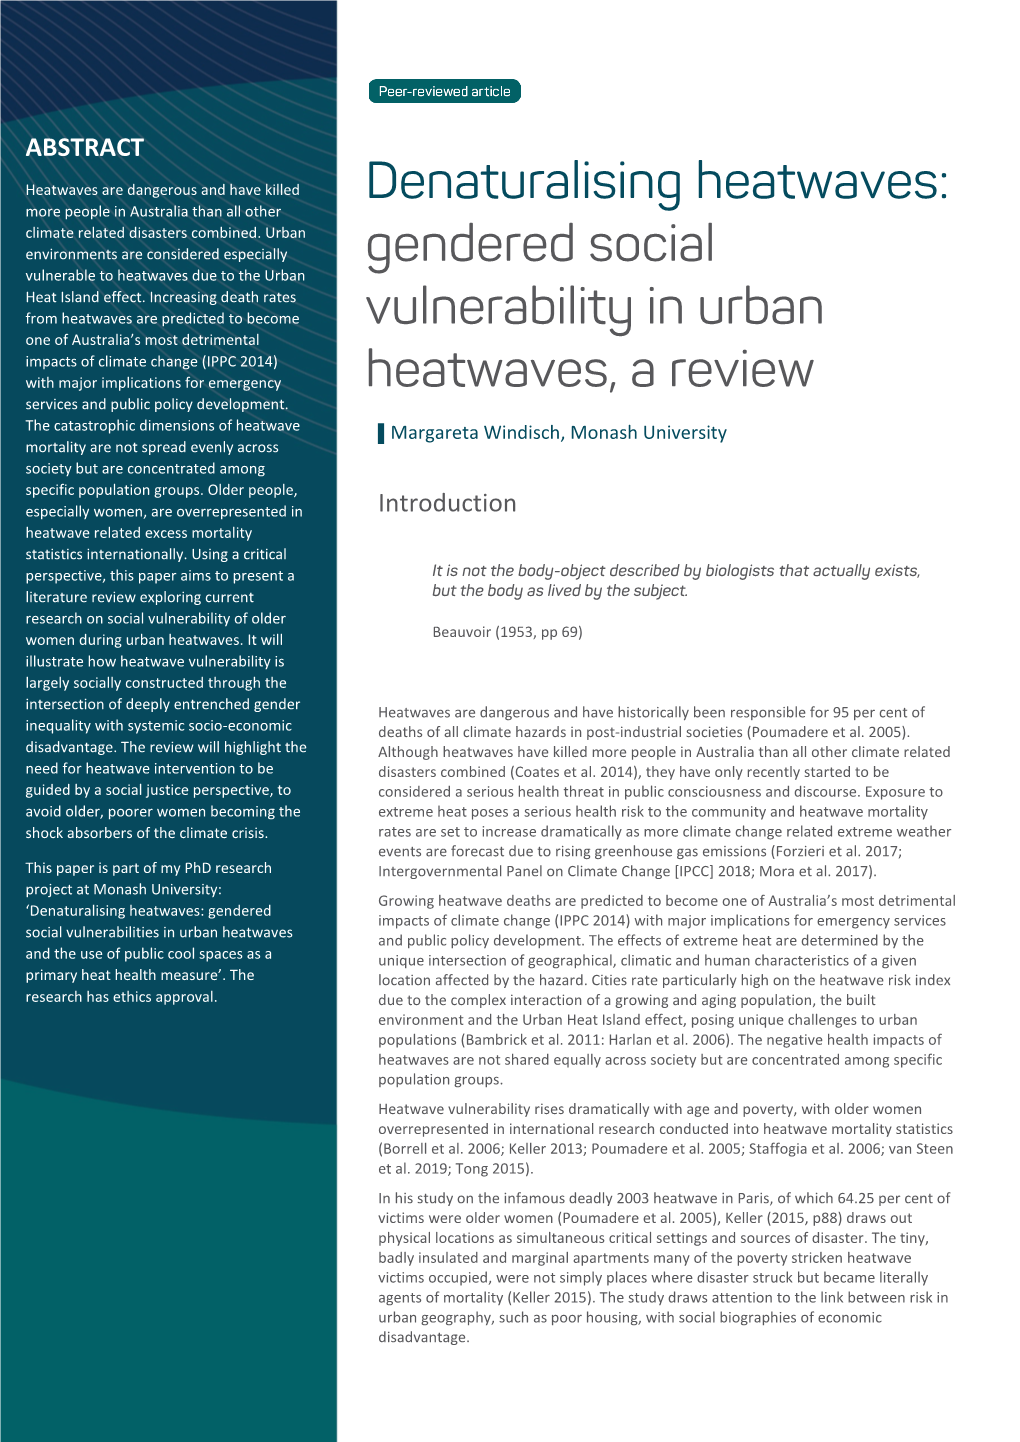 Gendered Social Vulnerability in Urban Heatwaves, a Review